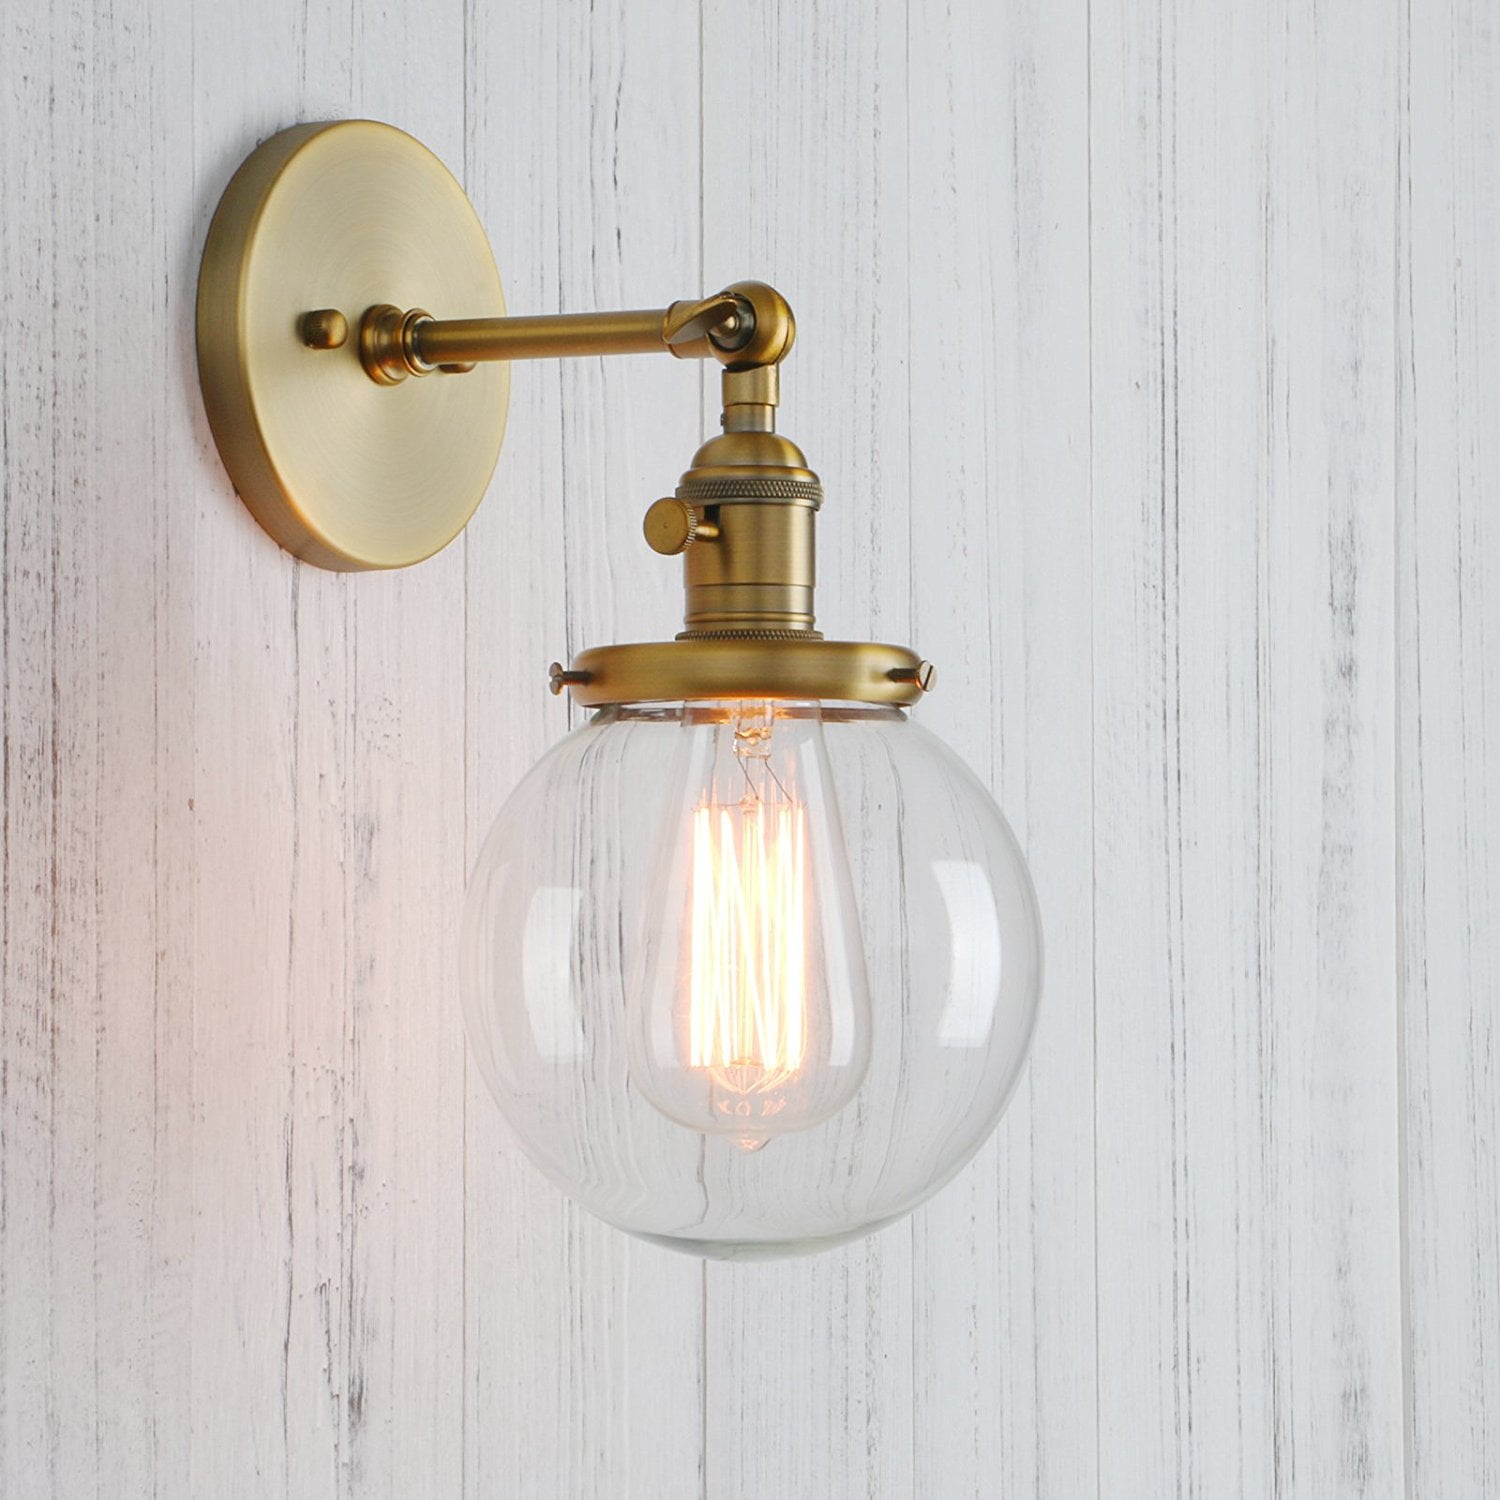 Antique Permo Wall Sconce Vintage Industrial 1-Light Rustic Wall Mount Light Fixture with 7.9 Round Clear Glass Globe Shade